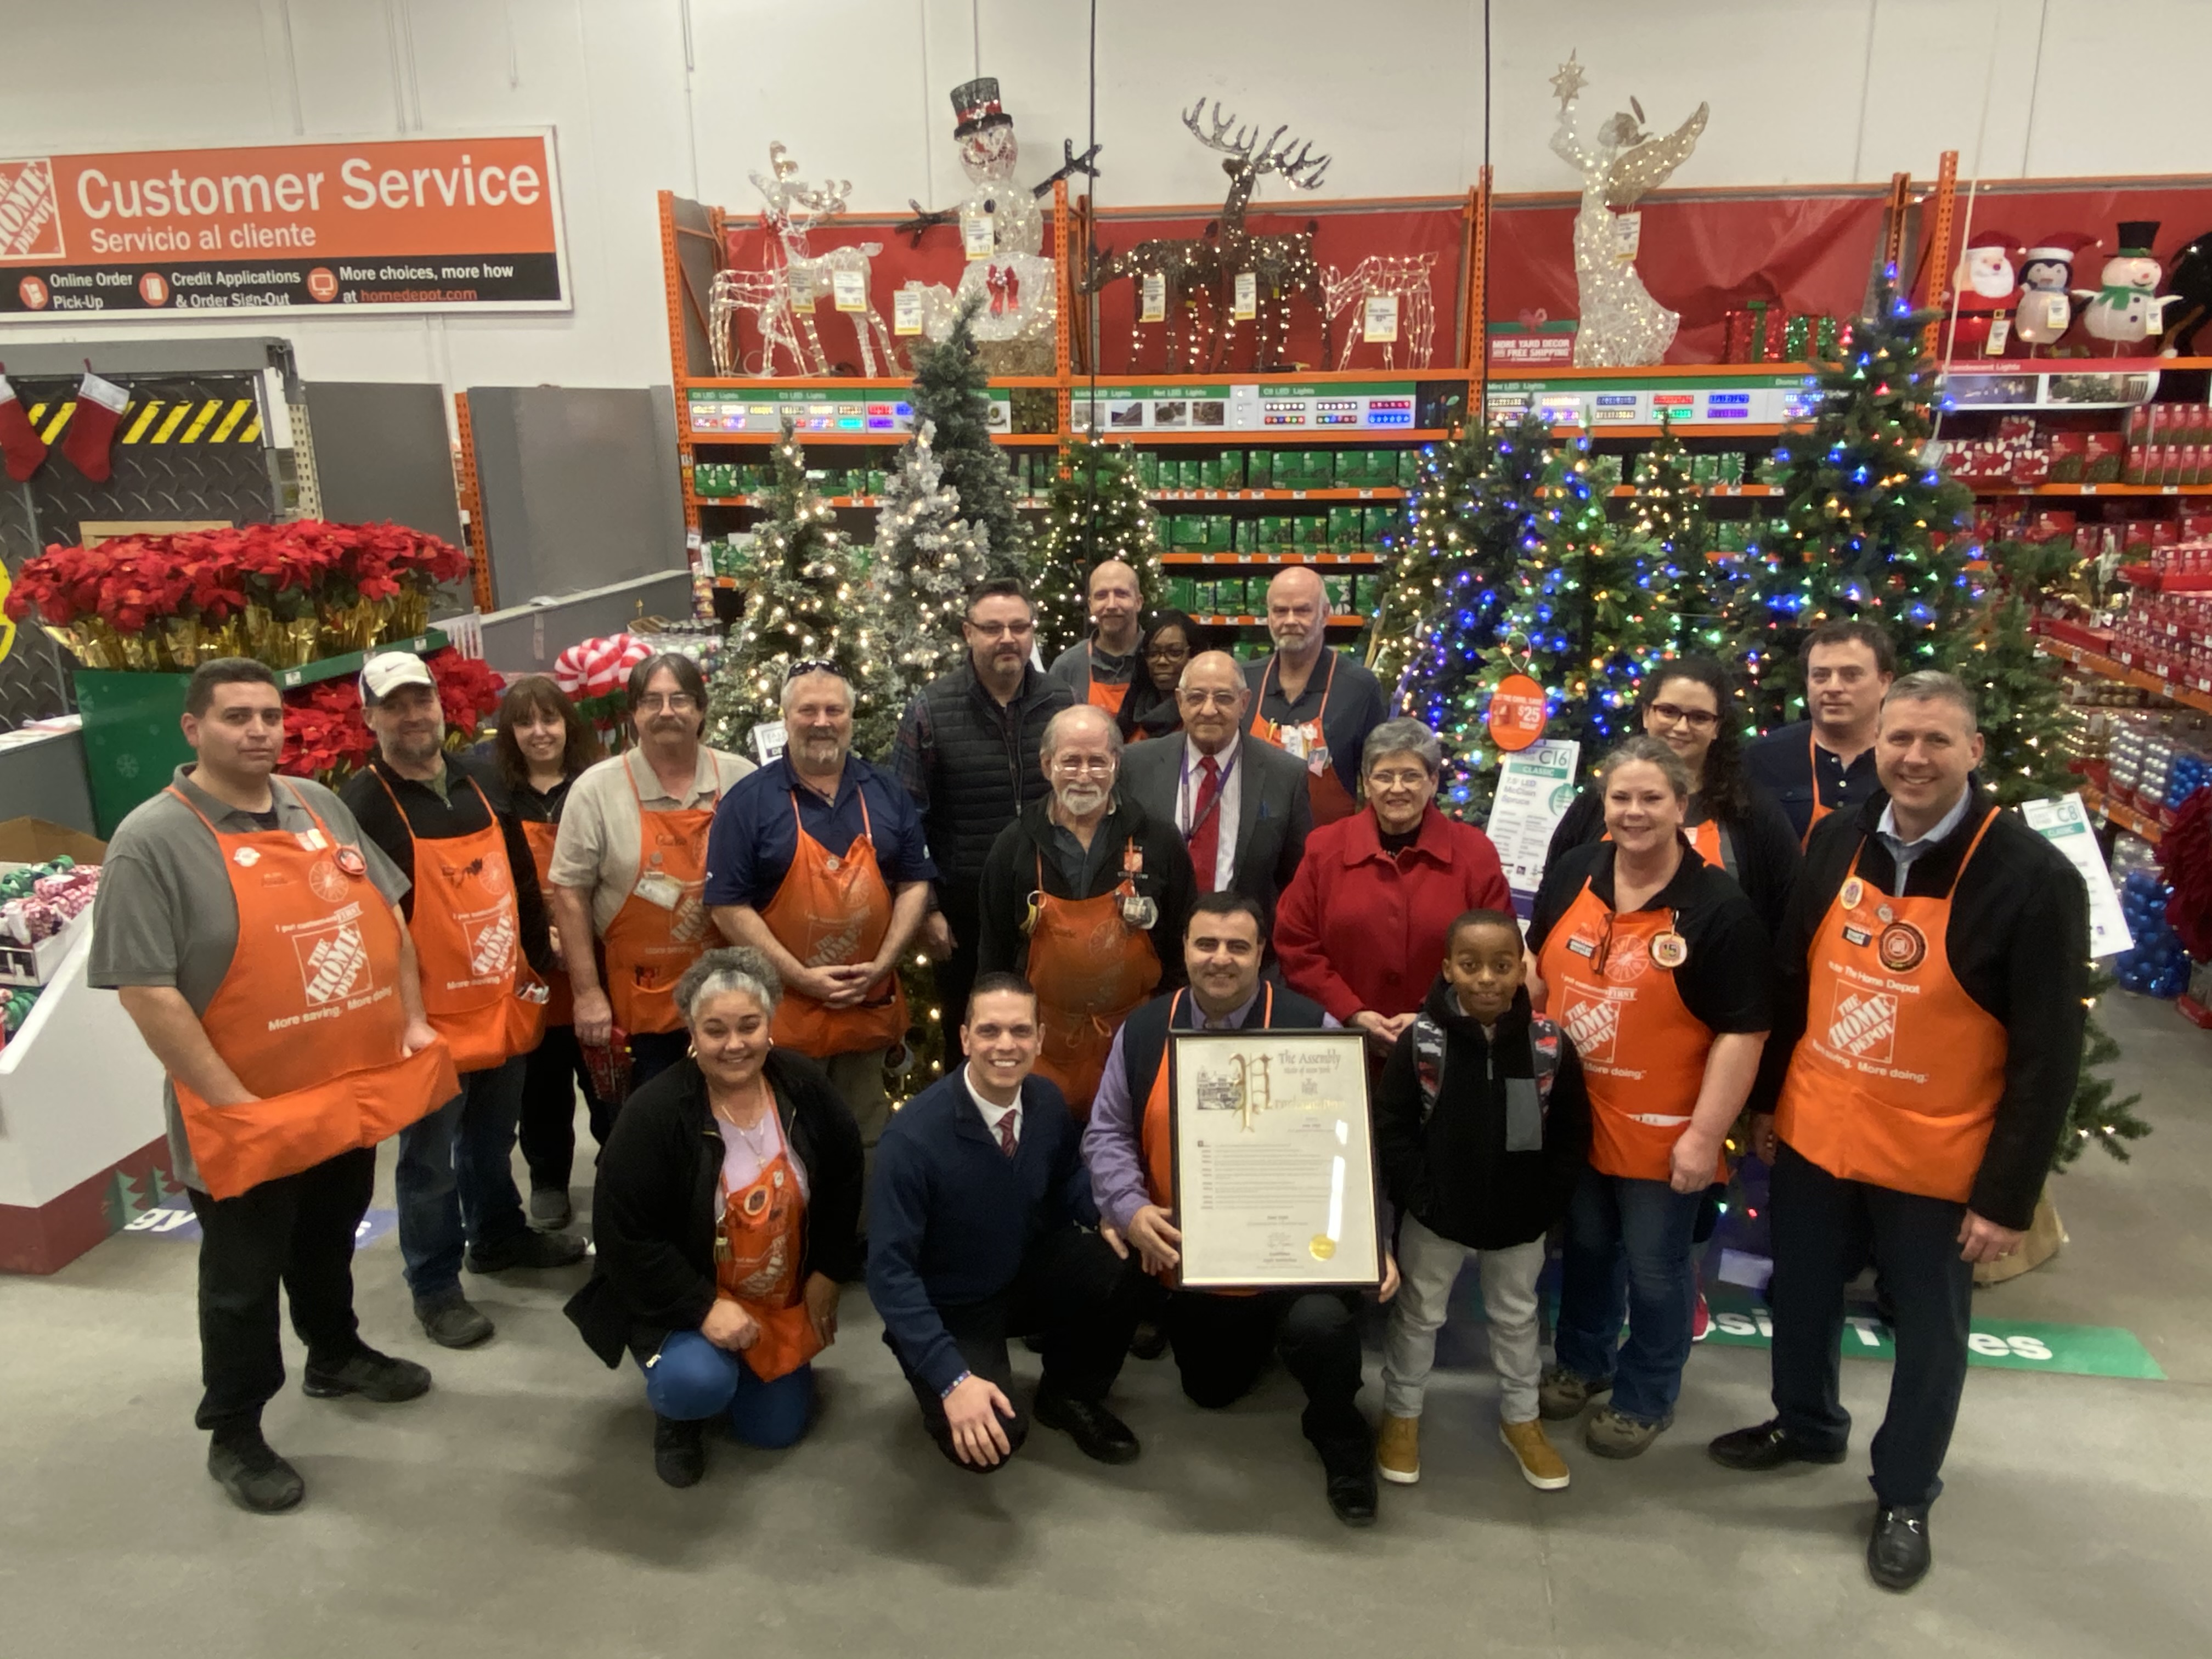 The management team and staff of Home Depot, join Assemblyman Santabarbara and Interim Superintendent of the Greater Amsterdam School District Dr. Ray Colucciello, School Board President Dr. Nellie Bu